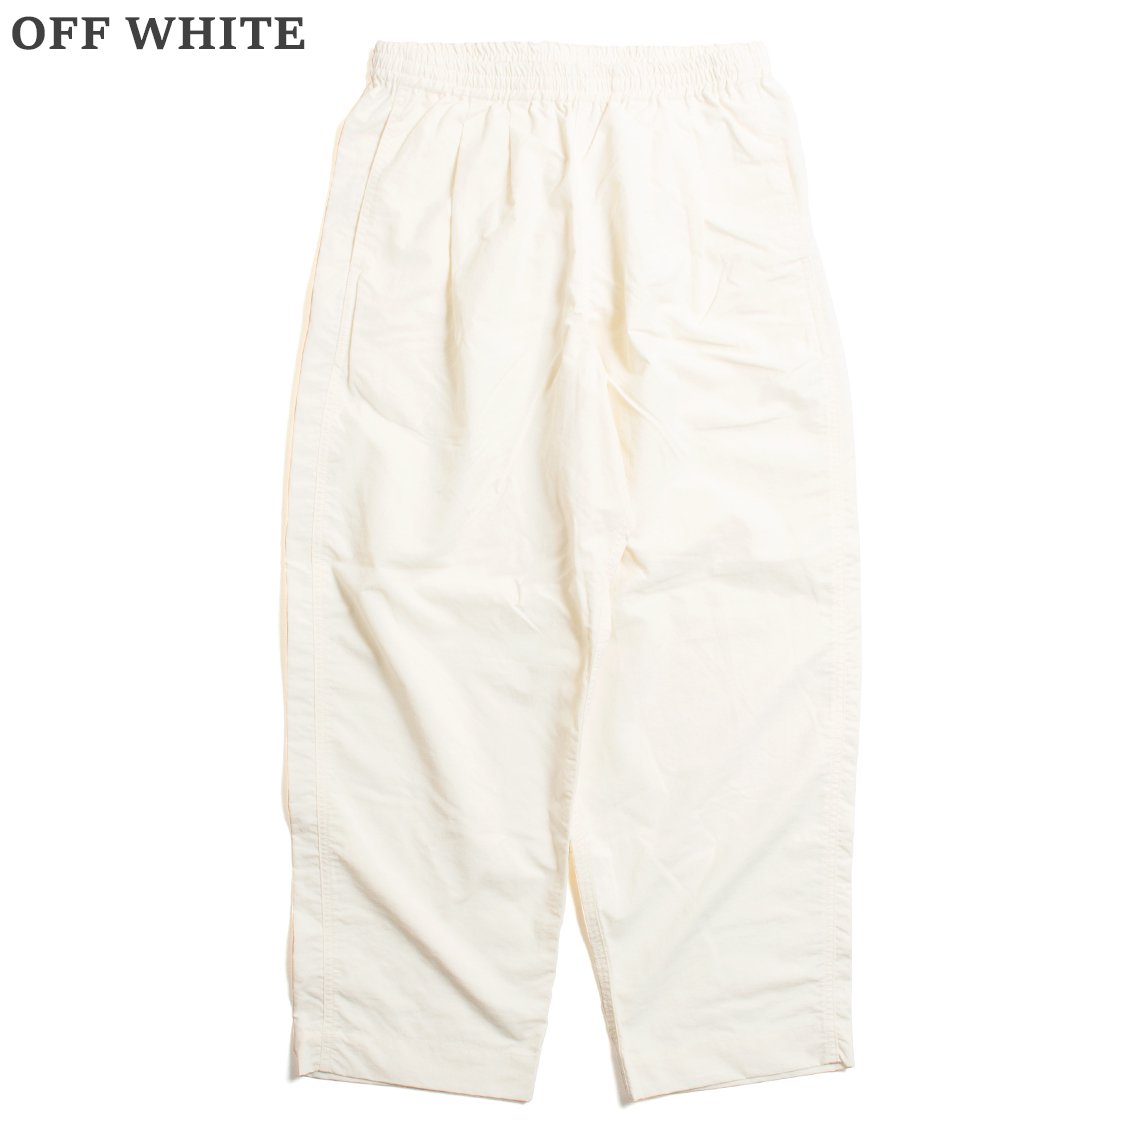 BURLAP OUTFITTER / バーラップ アウトフィッター] WIDE TRACK PANT サ